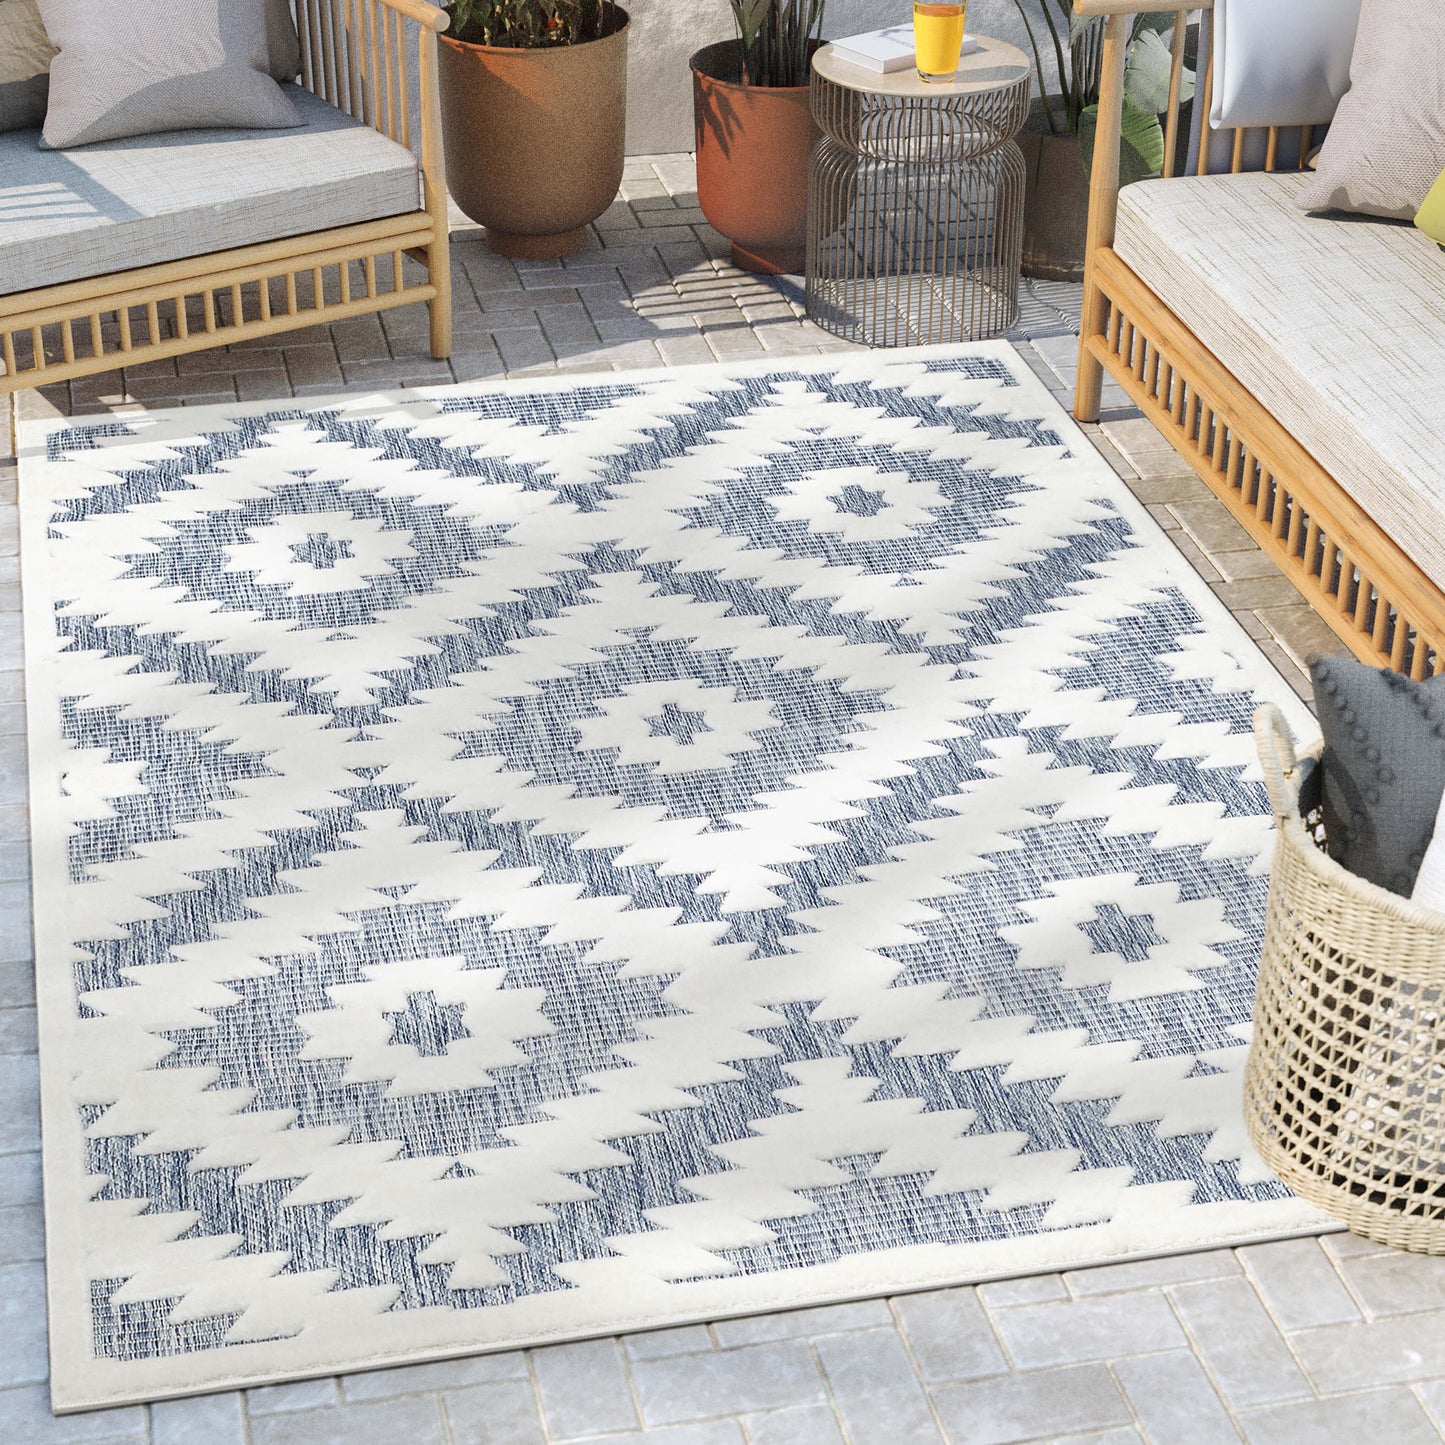 Keiko Tribal Moroccan Indoor/Outdoor Blue High-Low Rug SIL-24